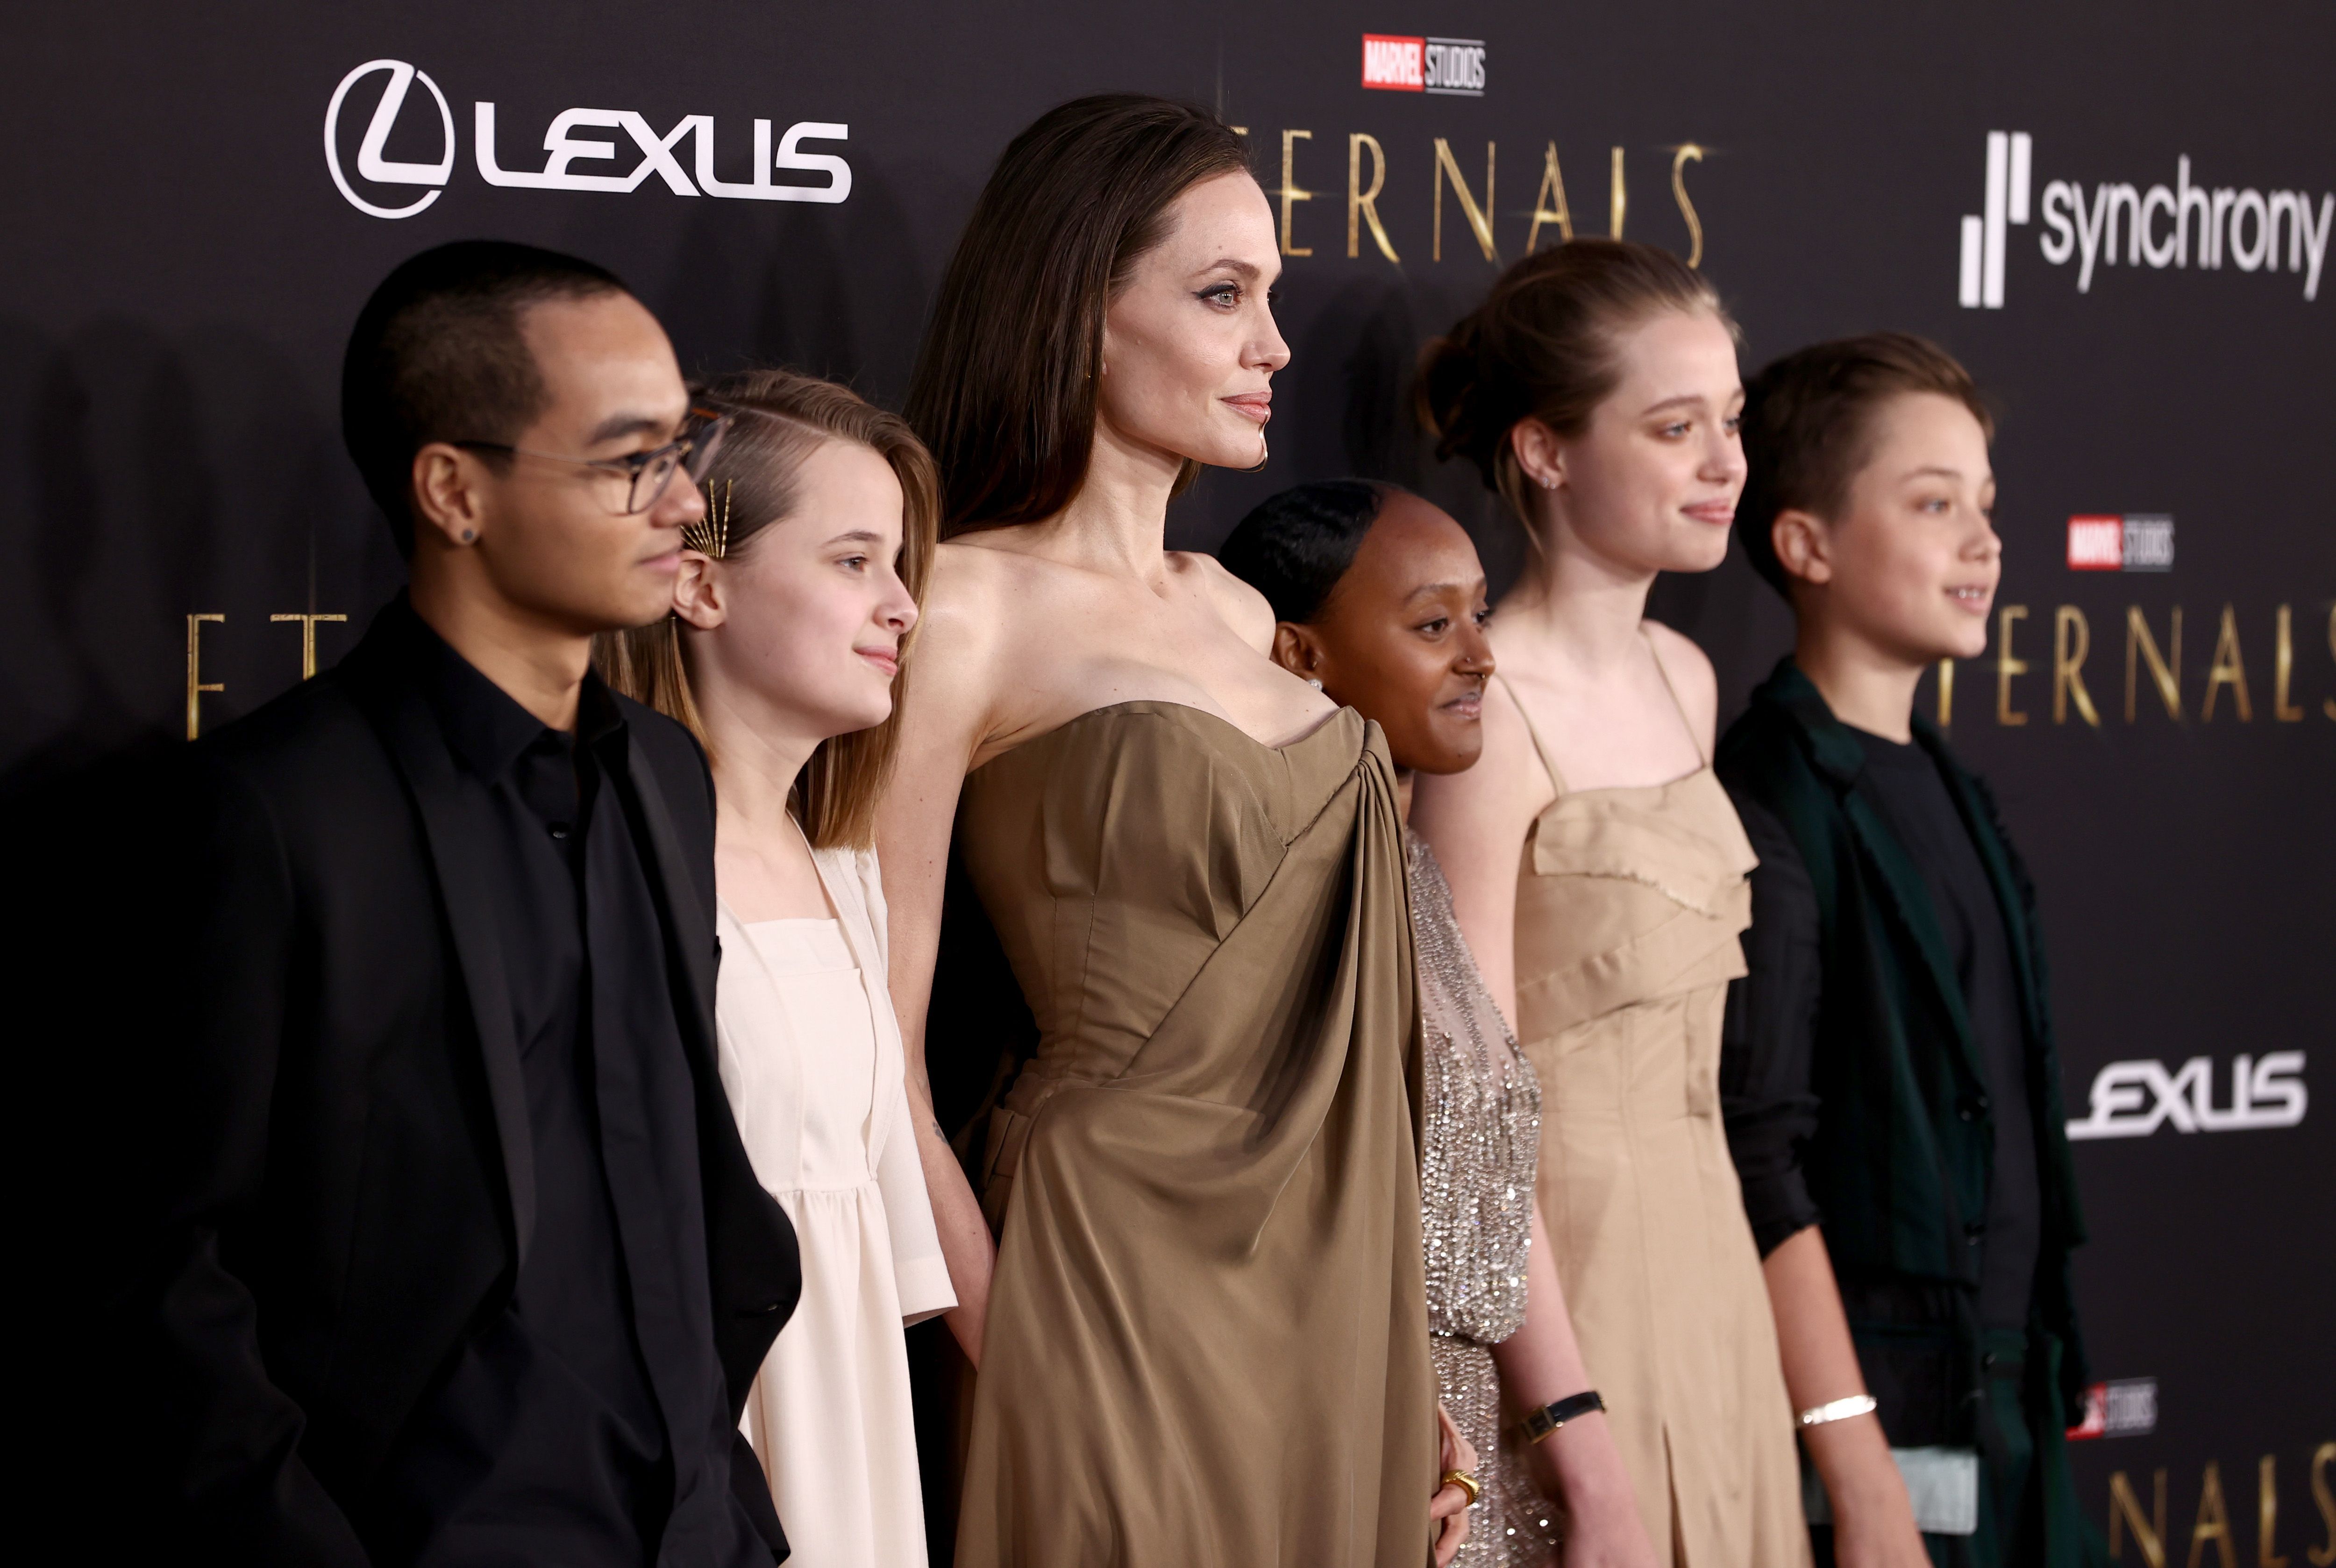 Angelina Jolie's Sons Maddox & Pax Join Her for Another Day of